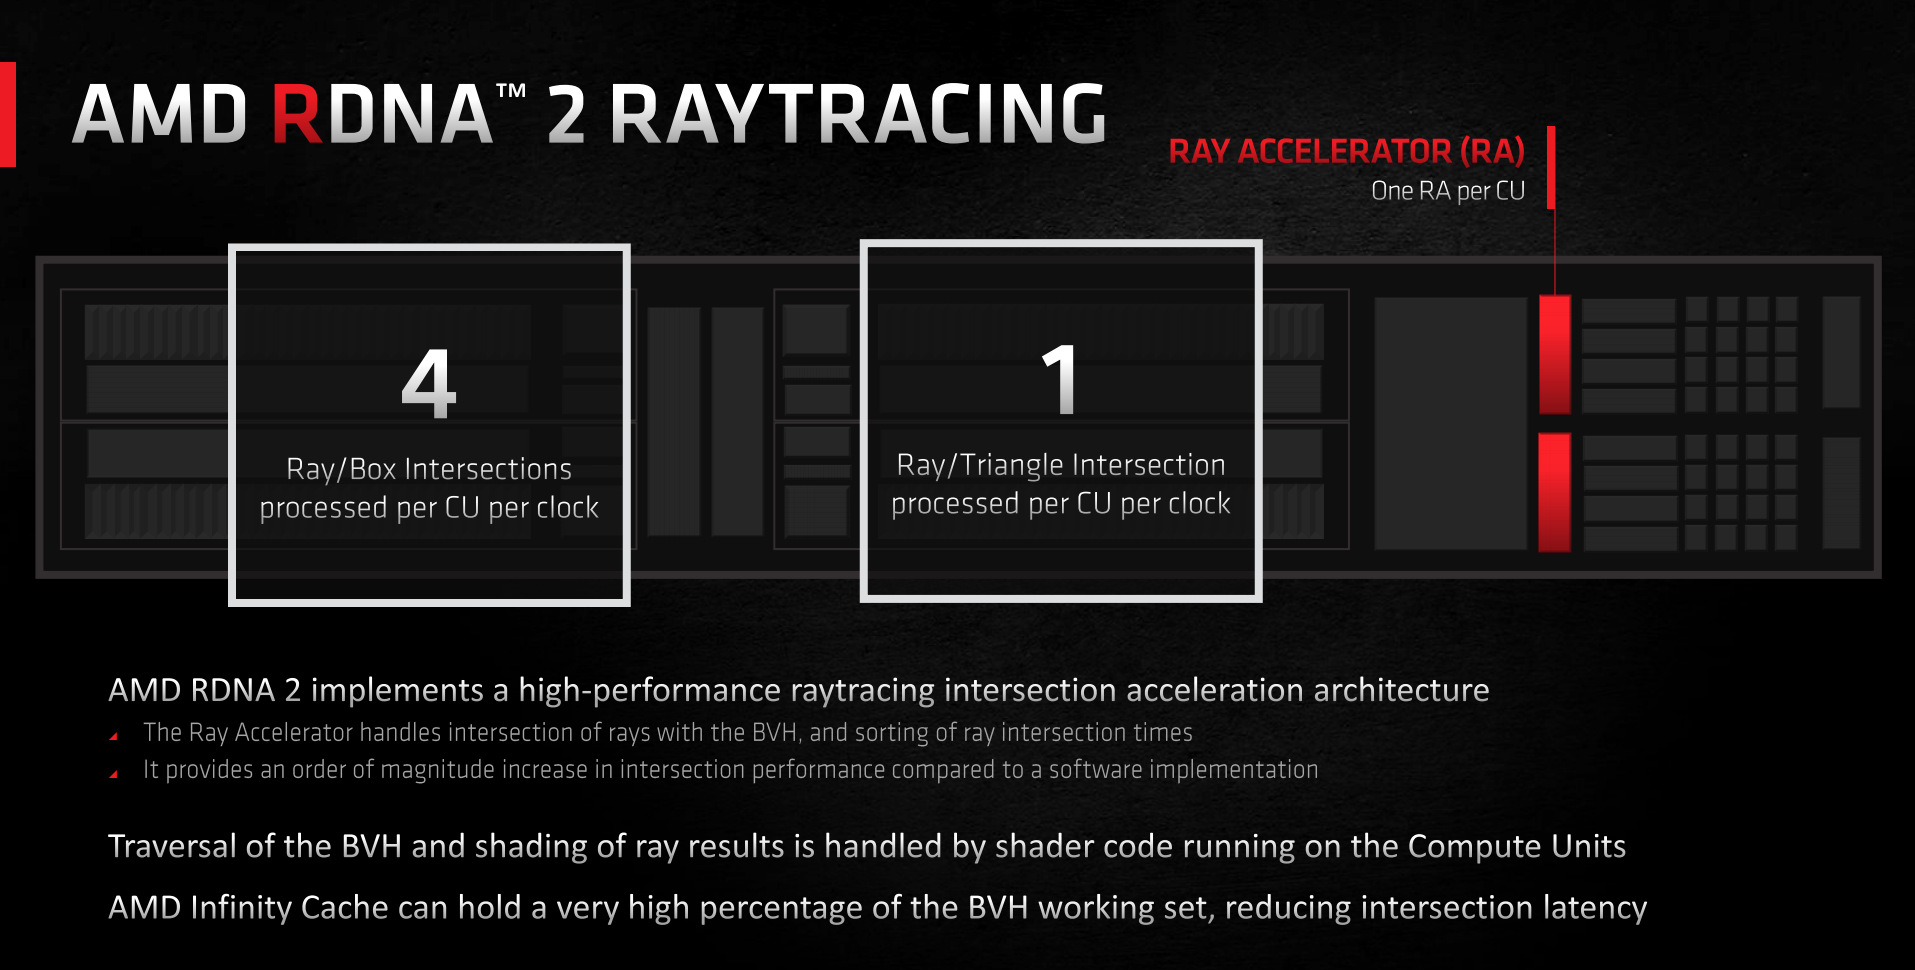 Sony's PlayStation could get a ray-tracing performance boost